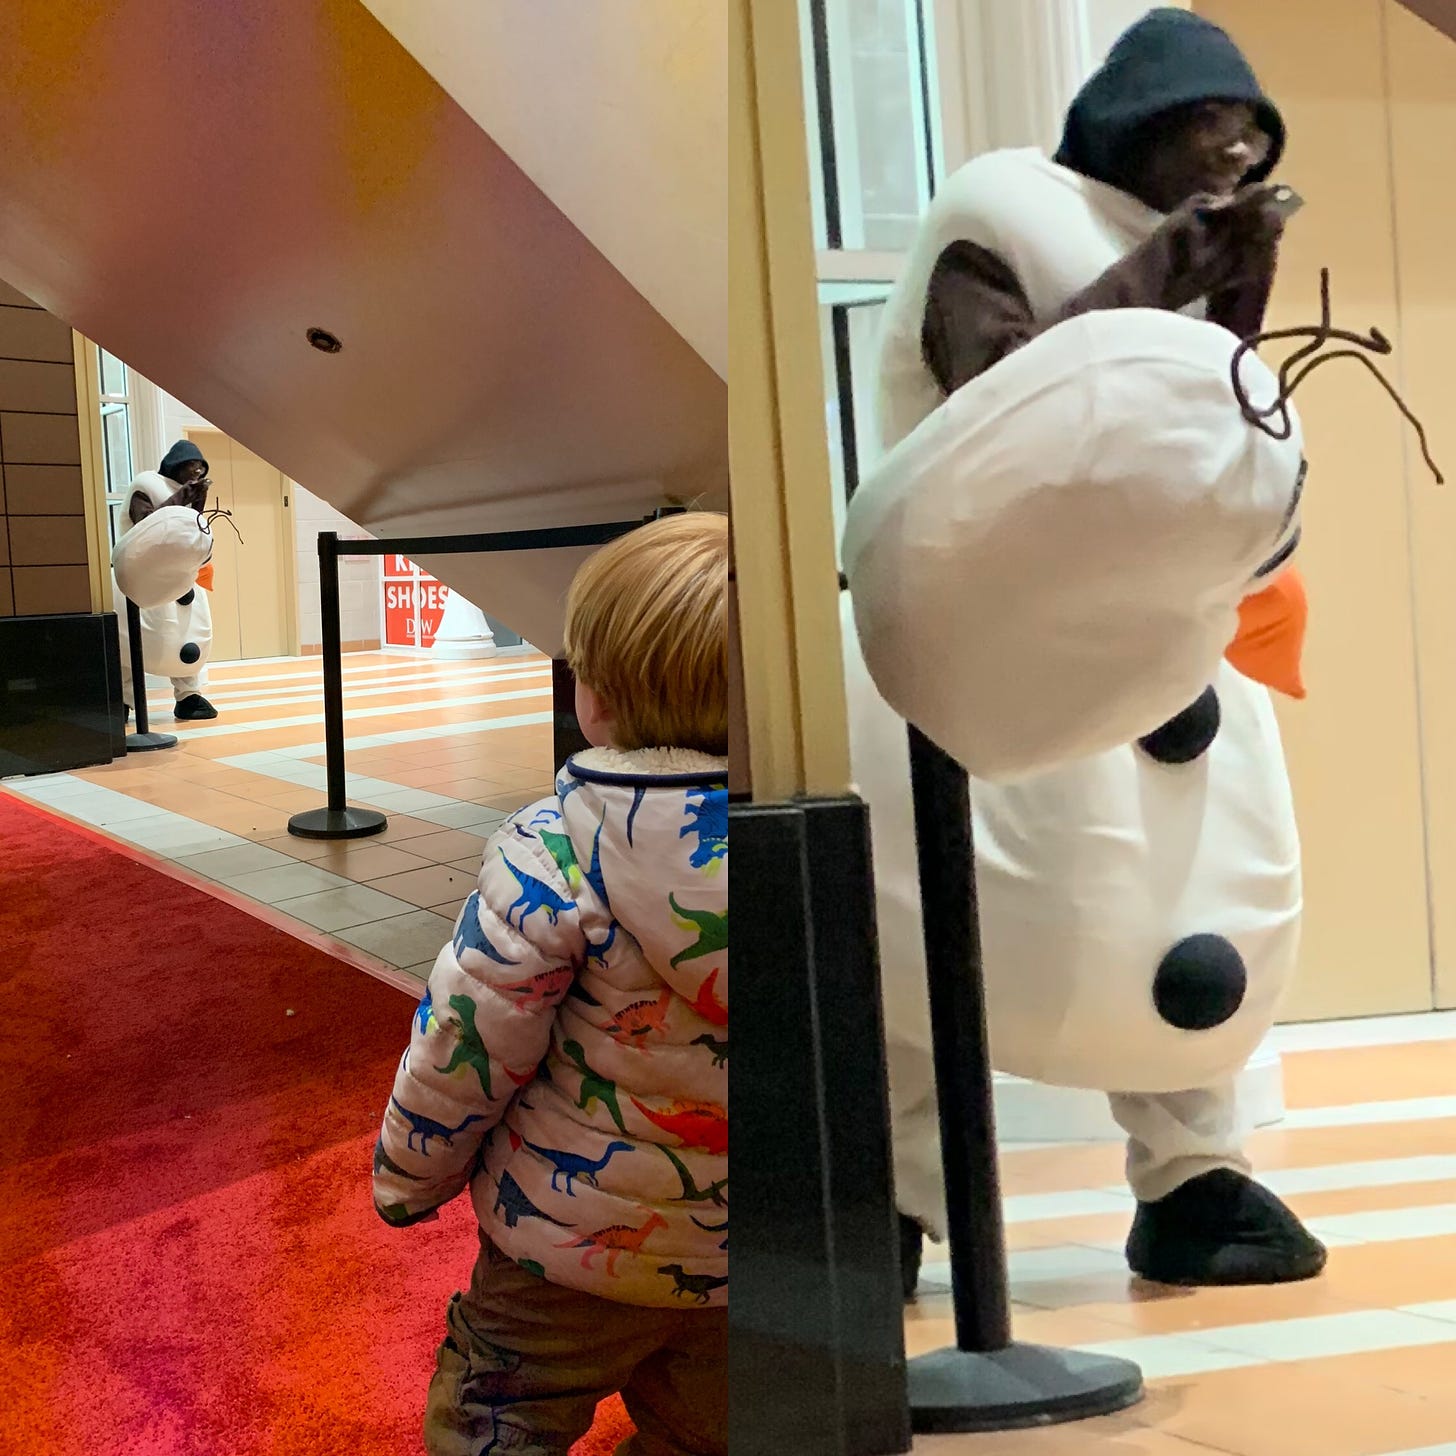 A man dressed in an Olaf costume stands in a mall with his character head off